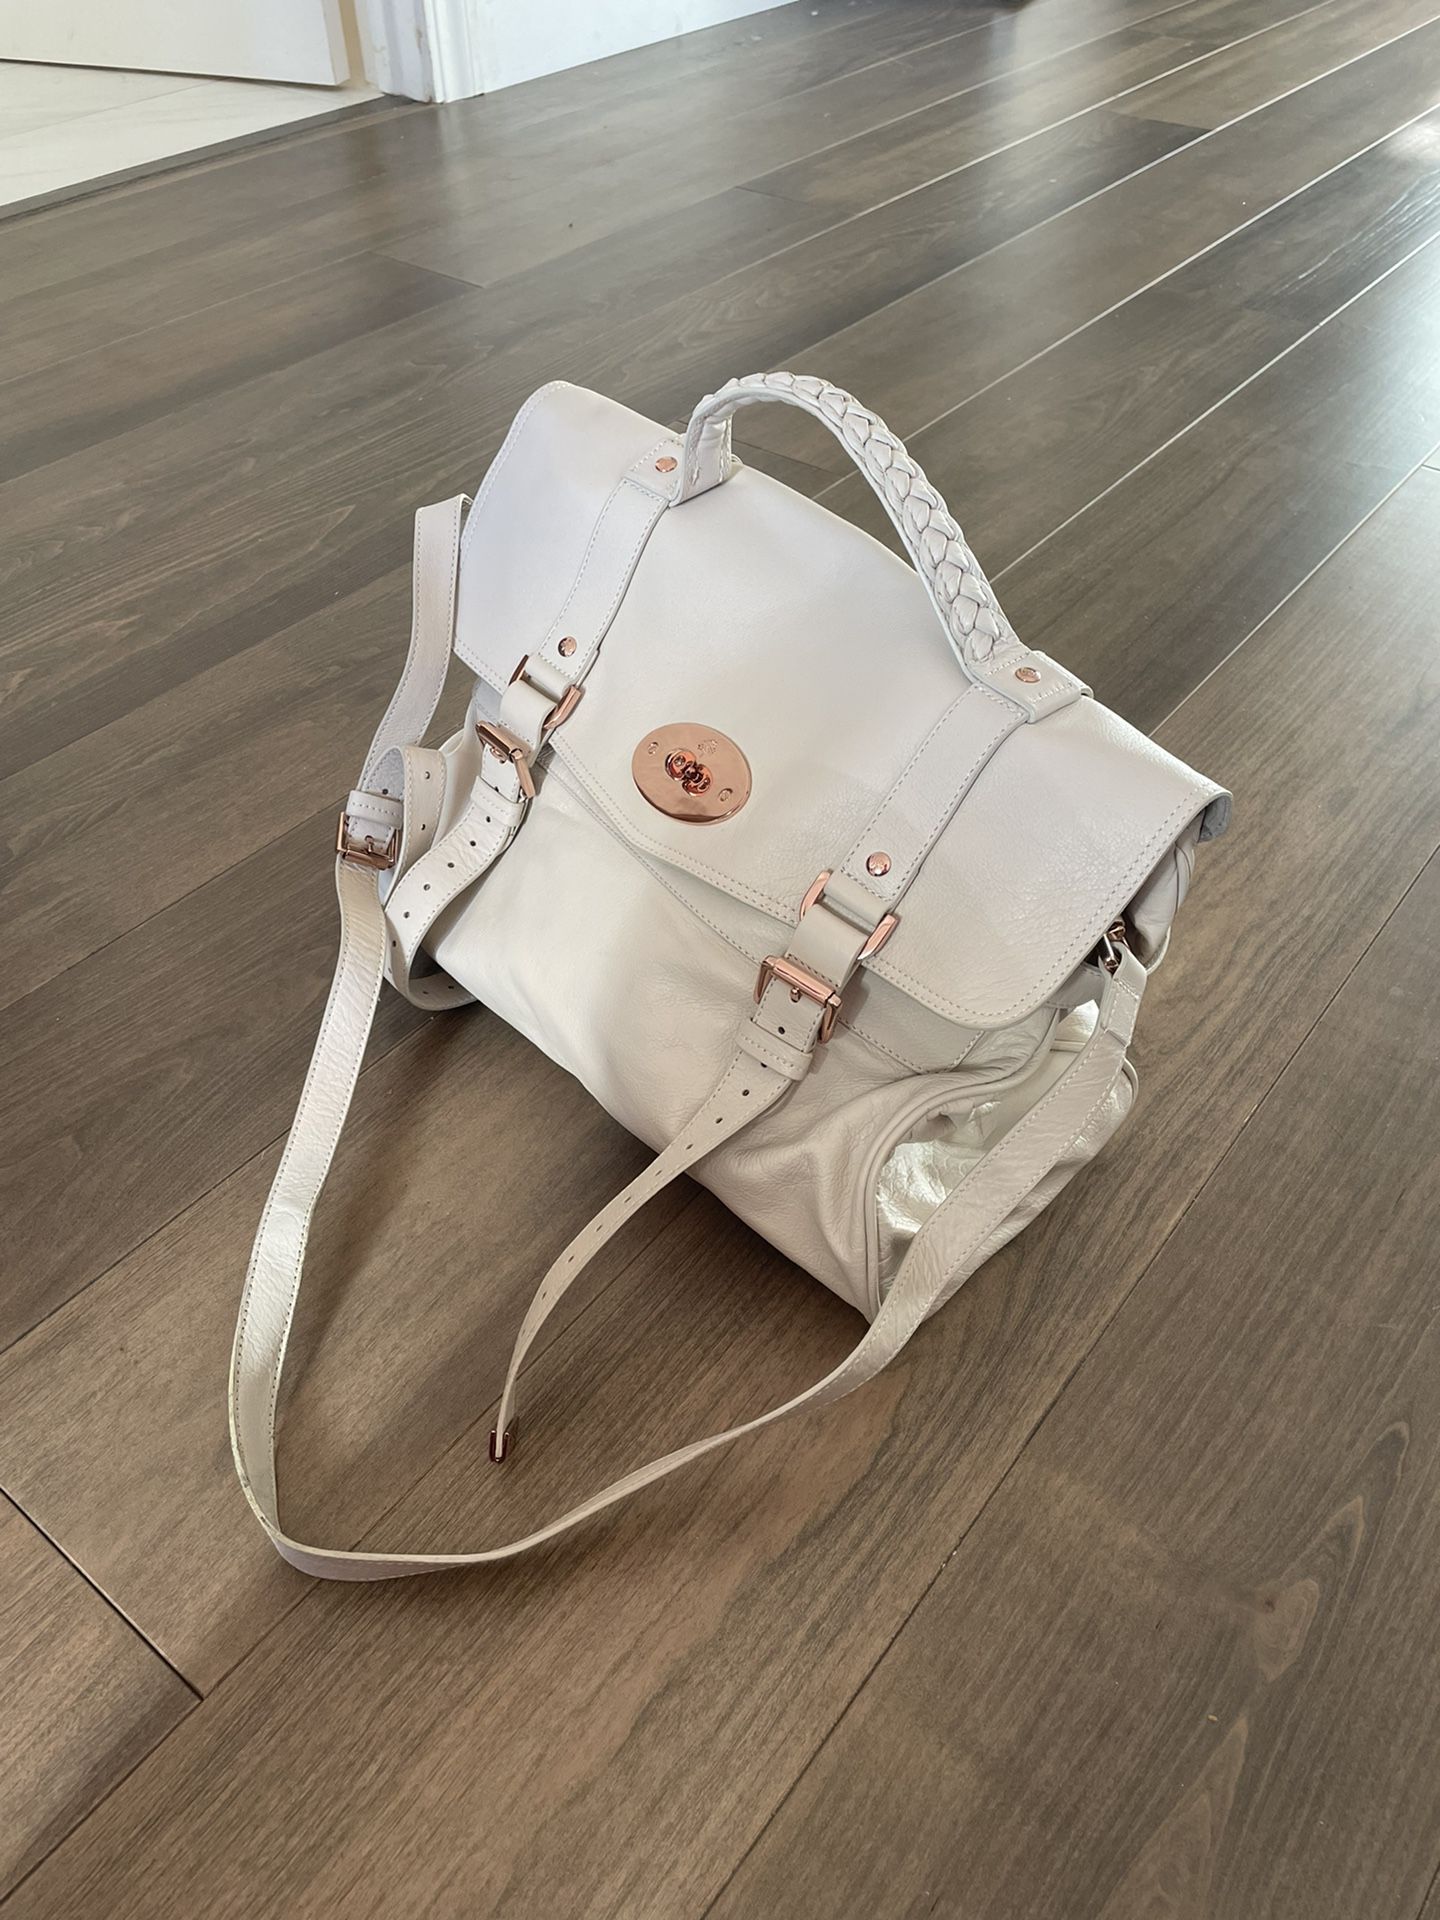 Mulberry Alexa Discontinued!! for Sale in Tukwila, WA - OfferUp